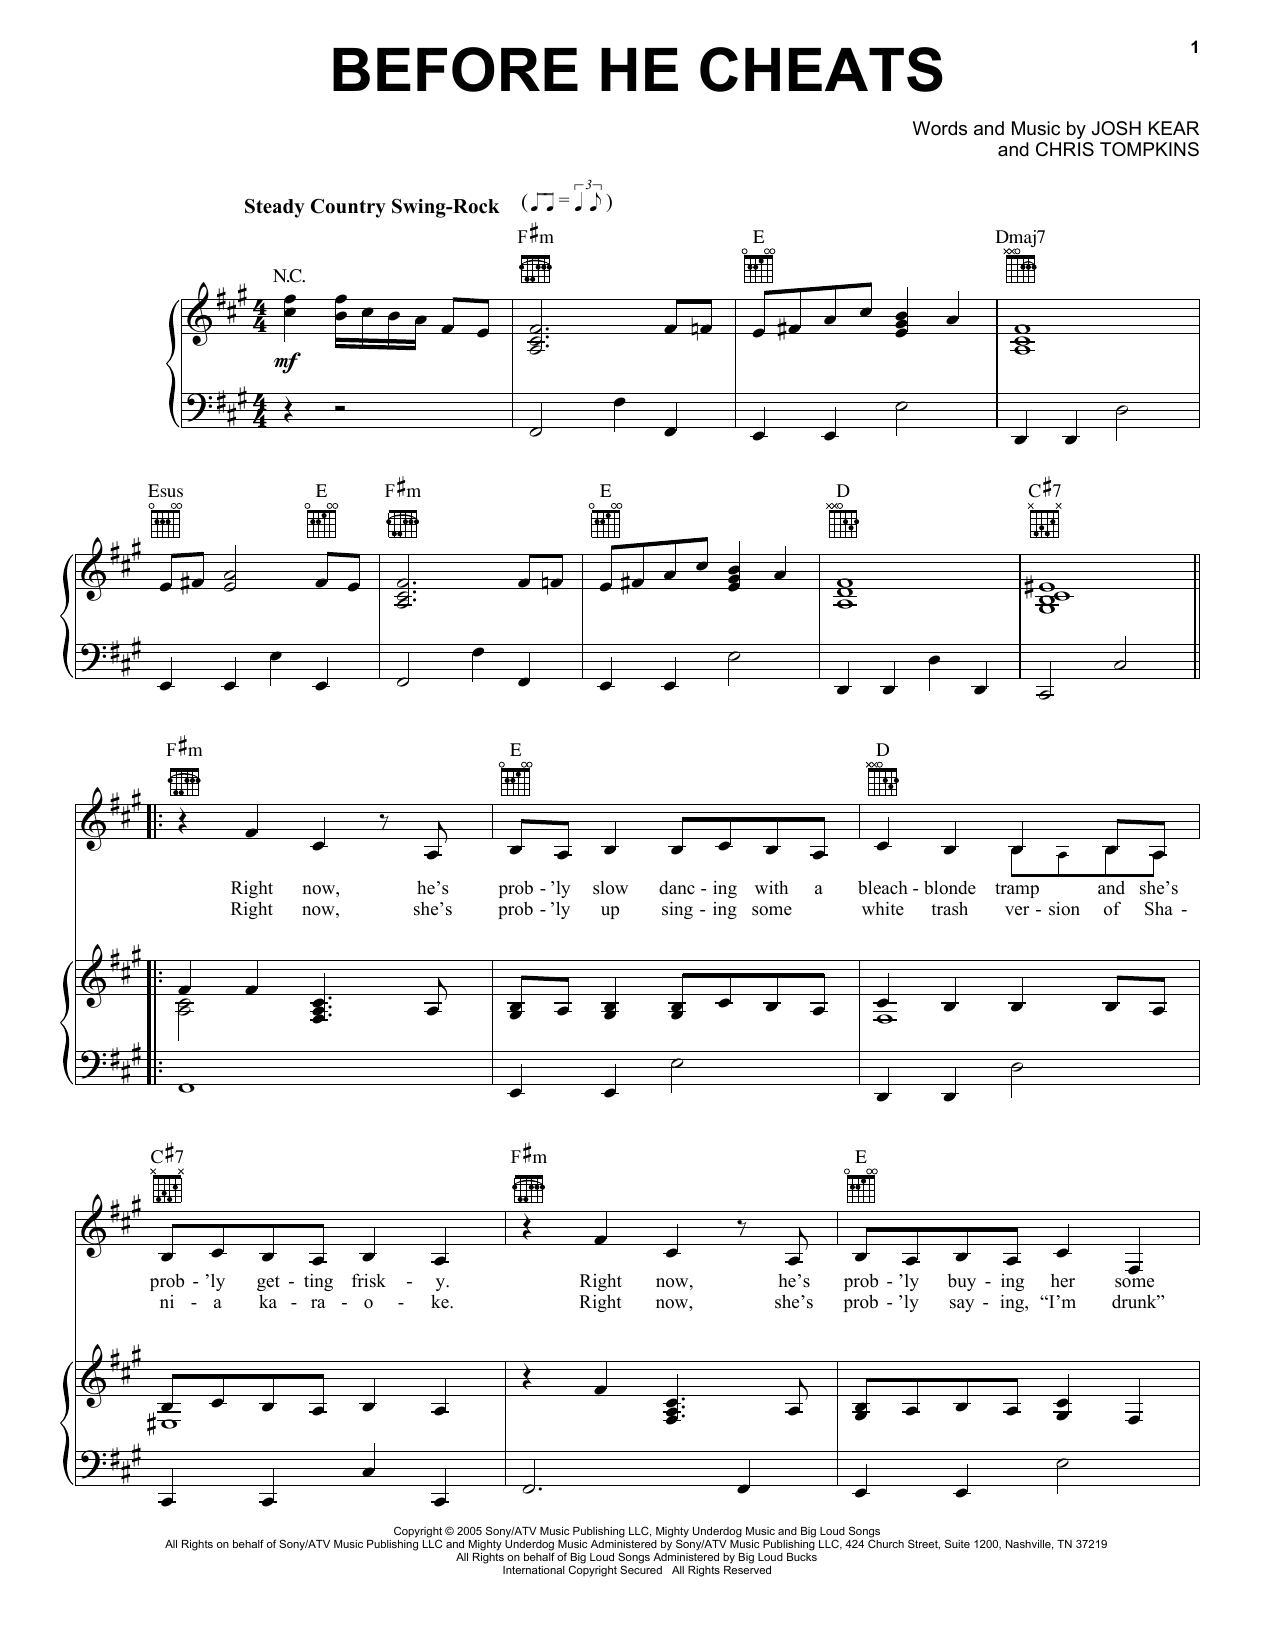 Carrie Underwood Before He Cheats sheet music notes and chords. Download Printable PDF.